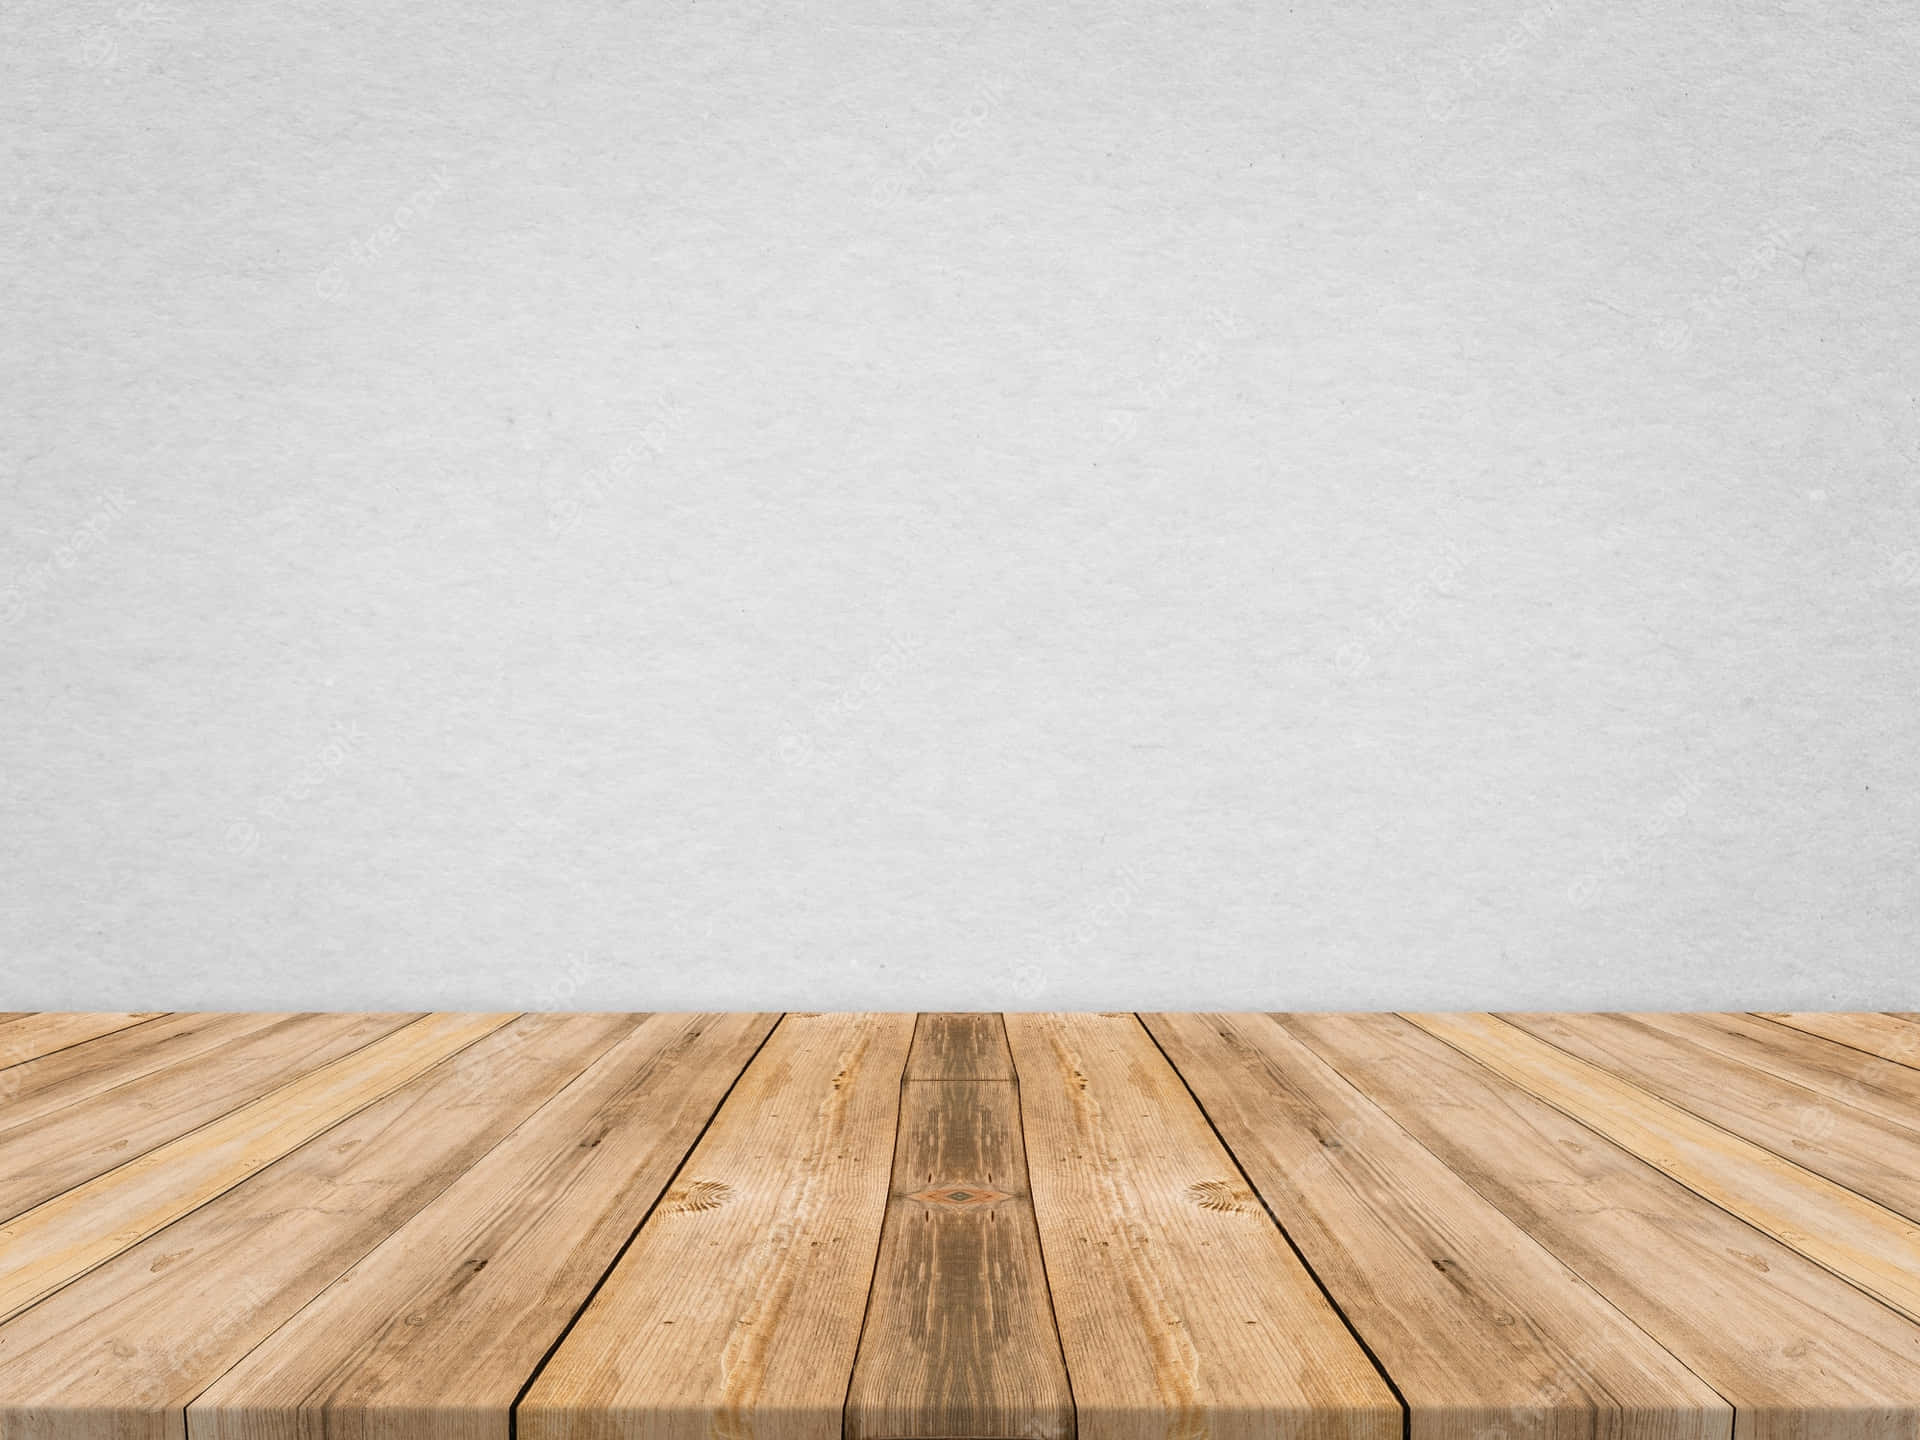 Table Against White Wall Background